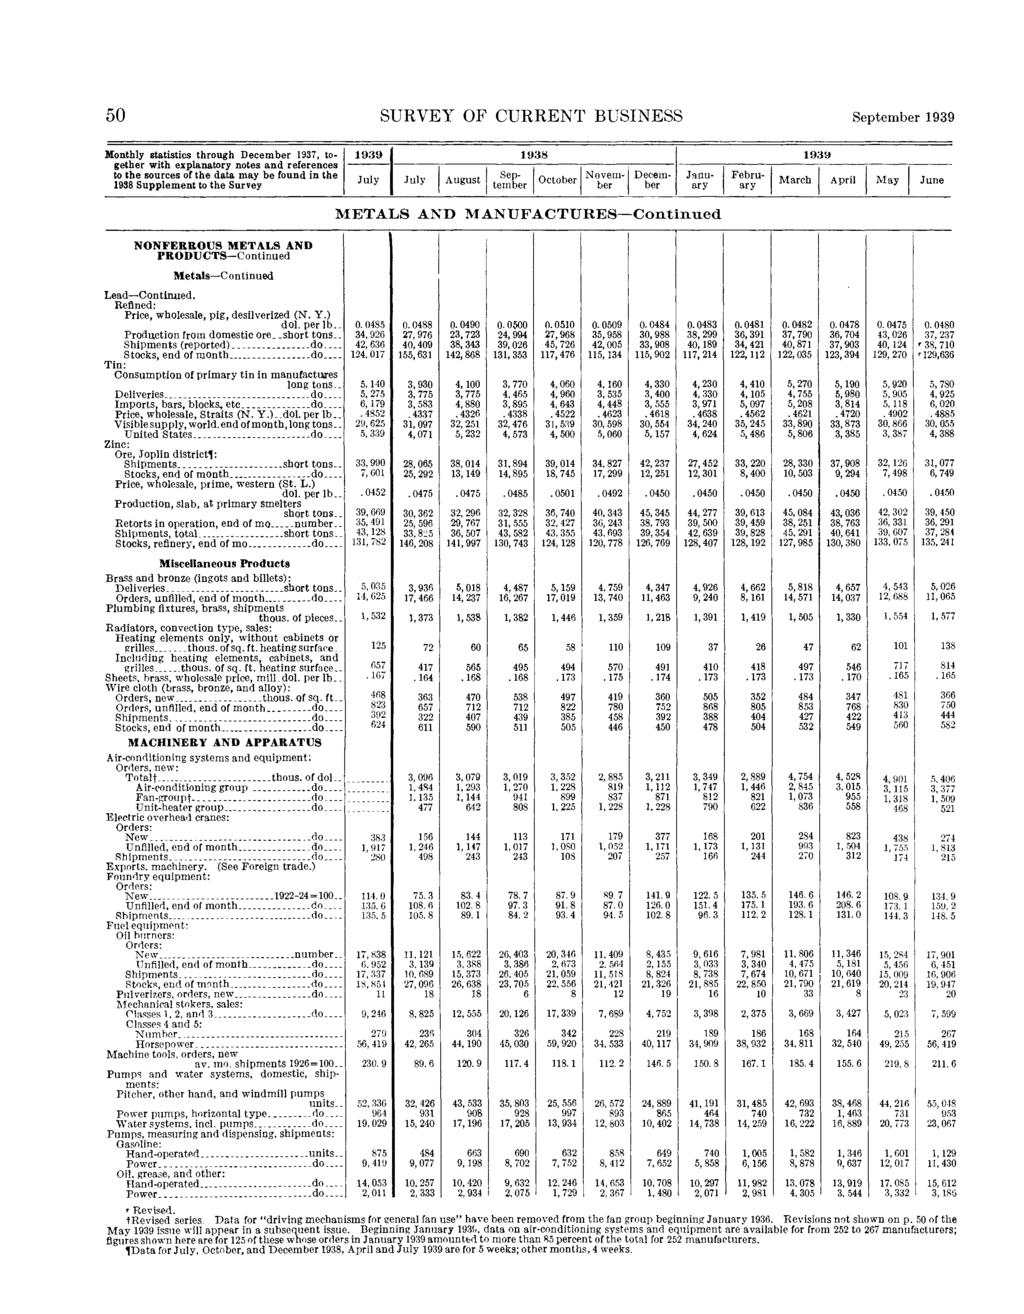 5 SURVEY OF CURRENT BUSINESS Monthly statistics through 1937, together Supplement to the Survey METALS AND MANUFACTURES Continued NONFERROUS METALS AND PRODUCTS-Continued Metals C ontinued Lead